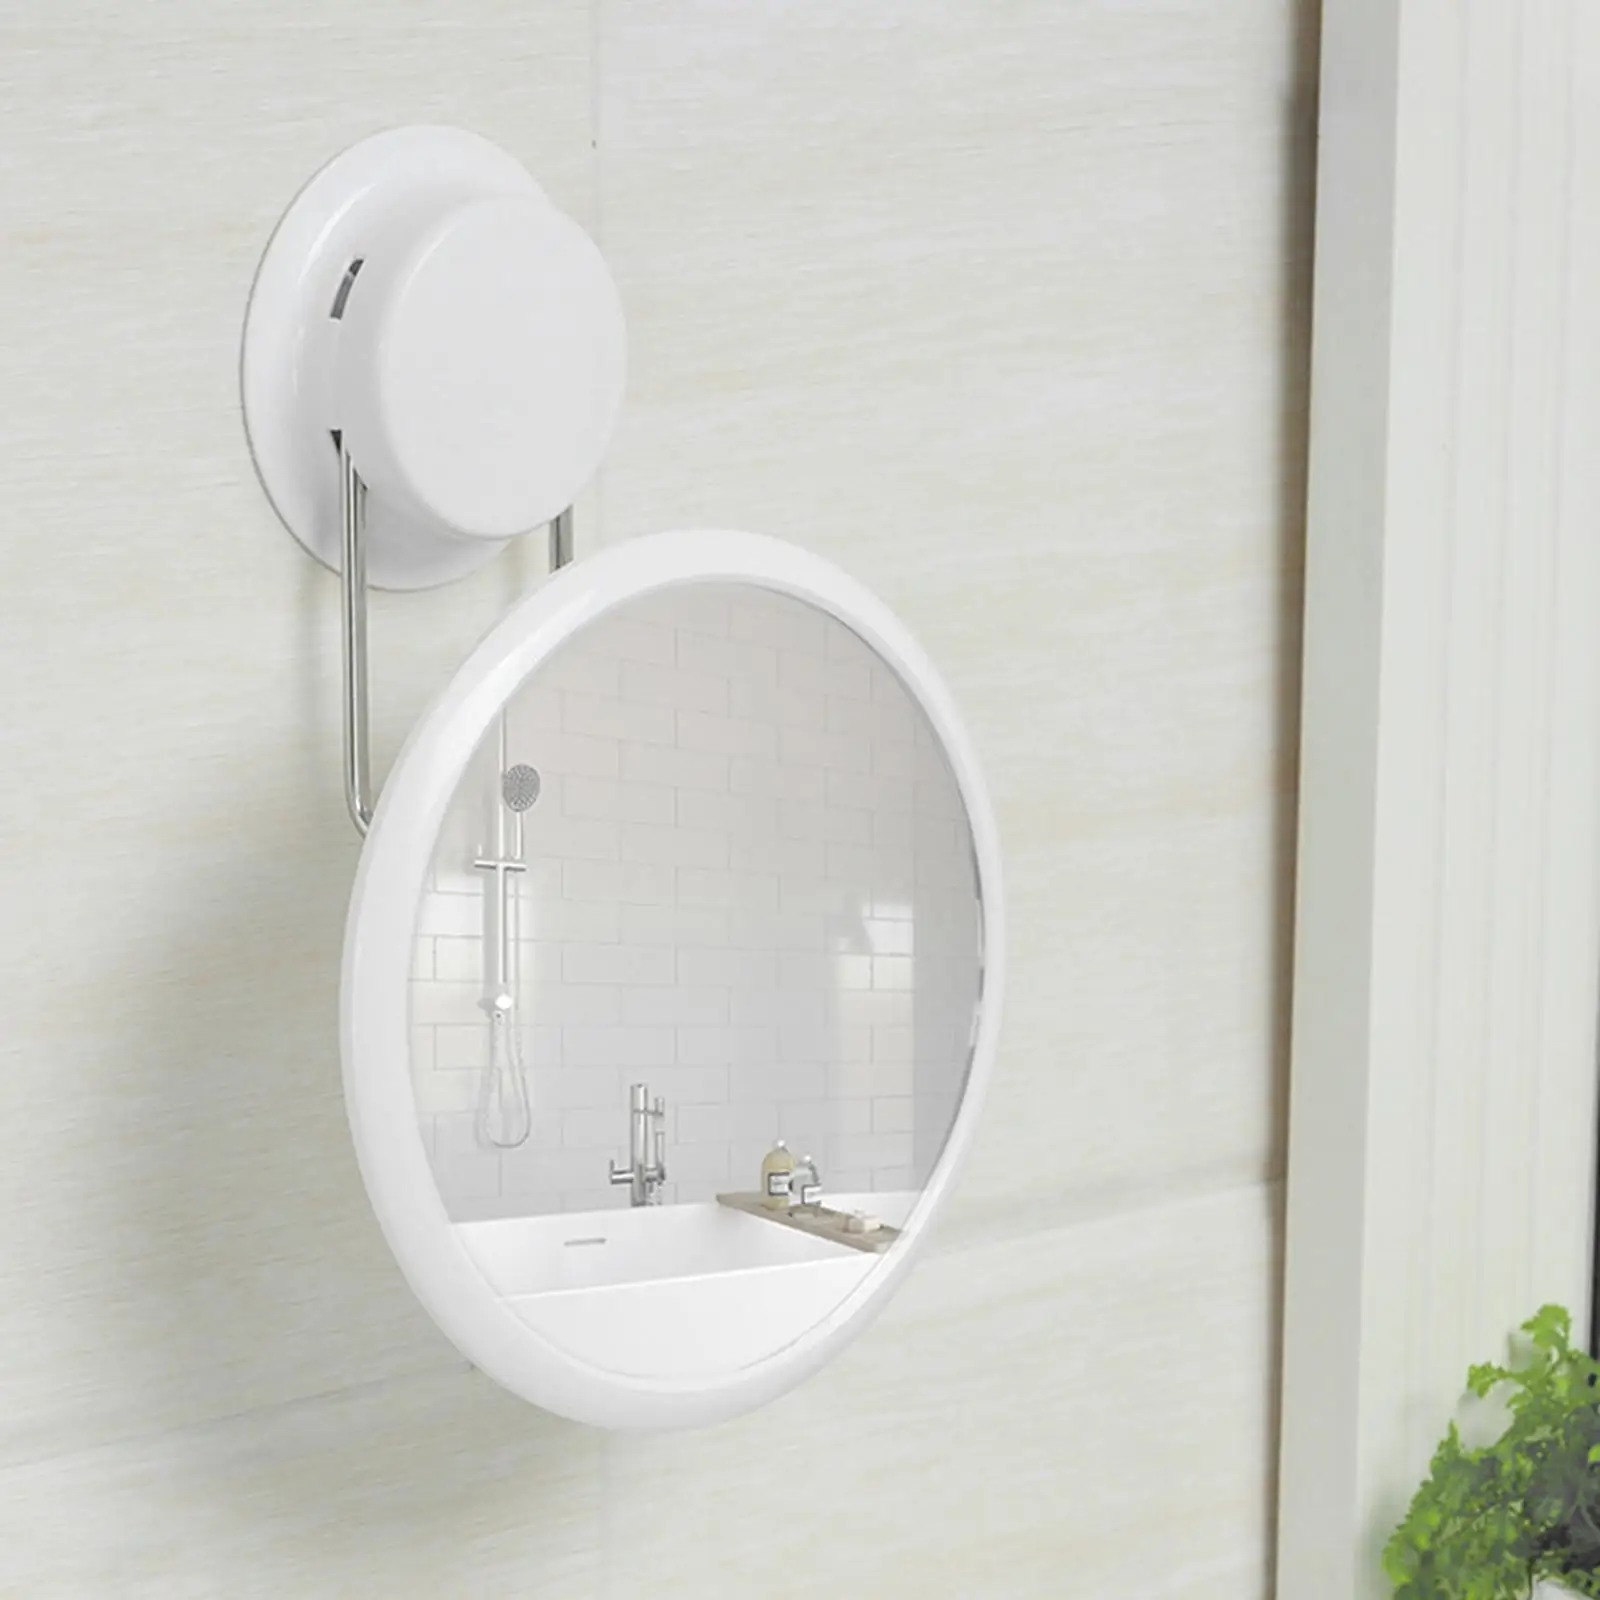 Home Wall Mounted Makeup Mirror Punch Free Foldable Rotating Dressing Mirror Plastic Polished and Smooth Without Traces No Nails